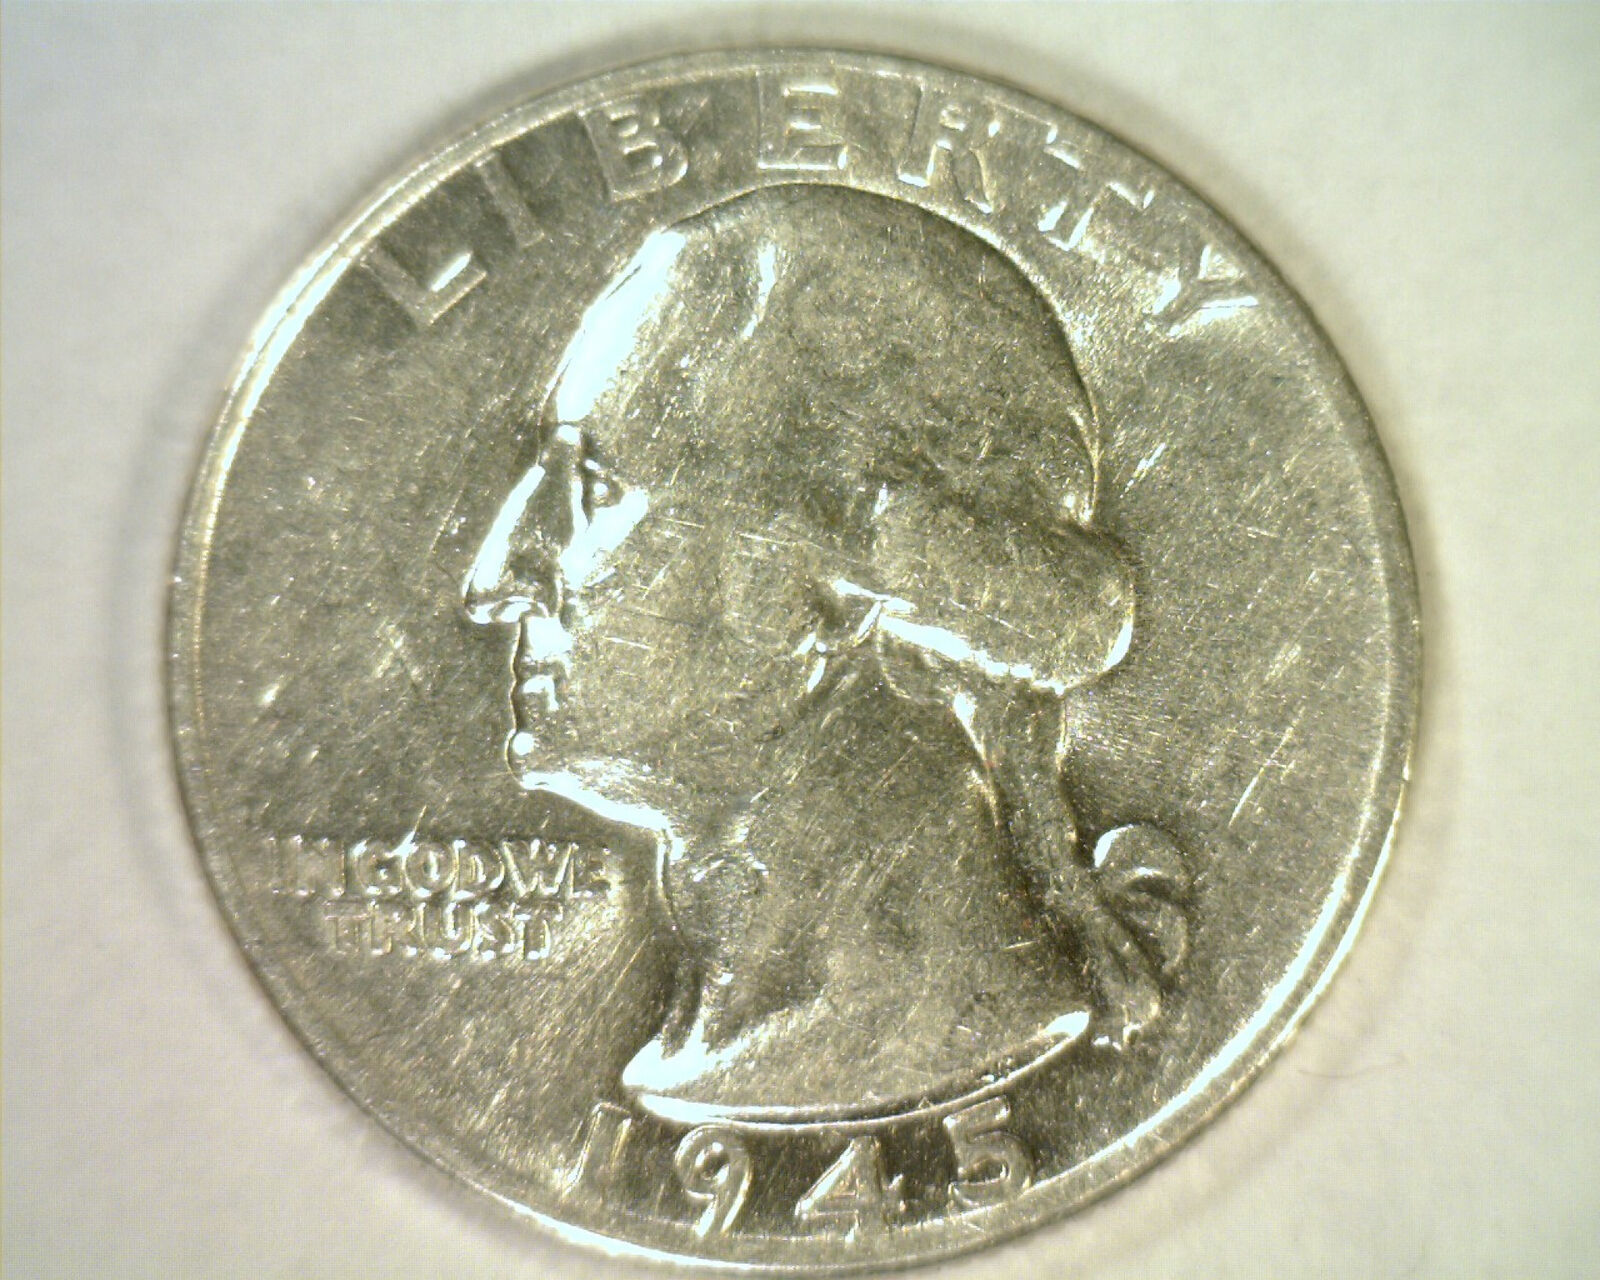 Primary image for 1945 WASHINGTON QUARTER ABOUT UNCIRCULATED+ AU+ NICE ORIGINAL COIN 99c SHIPMENT